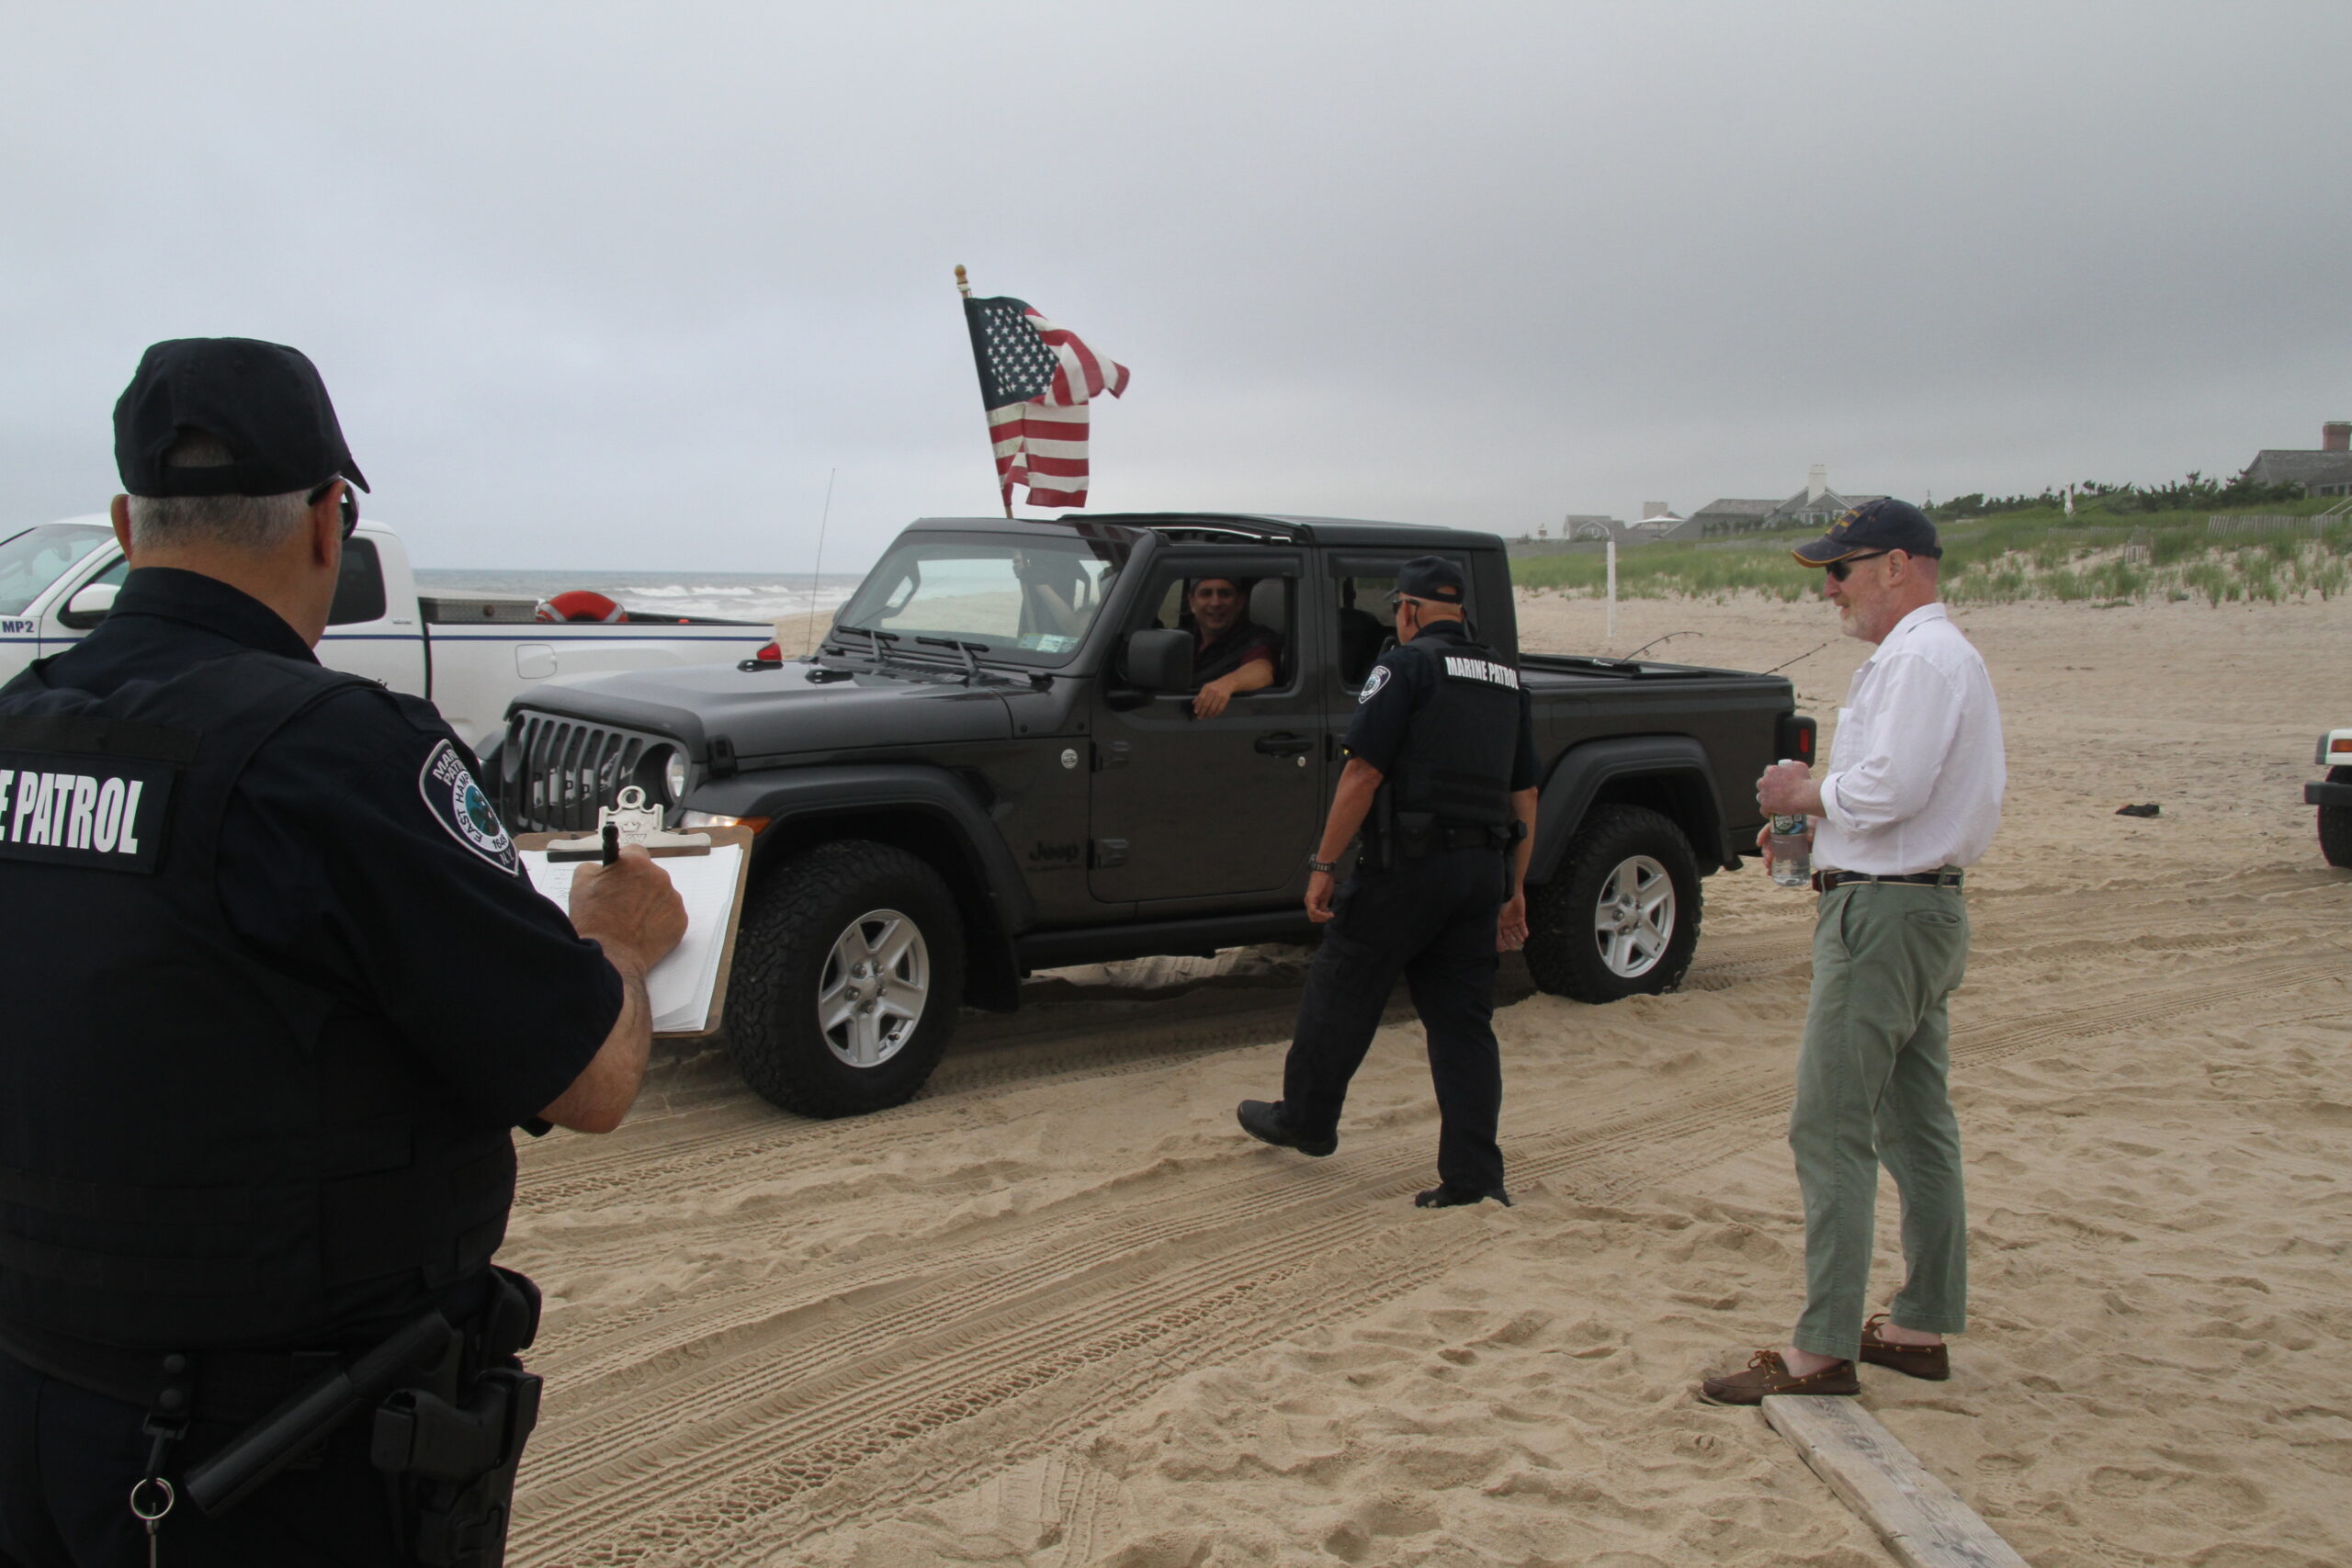 In June 2021, fishermen and 4x4 owners staged a willful violation of the court orders to keep 4x4 vehicles off the beach in Amagansett. Town Marine Patrol officers logged the violators' license plate numbers but did not block the vehicles from entering the beach.